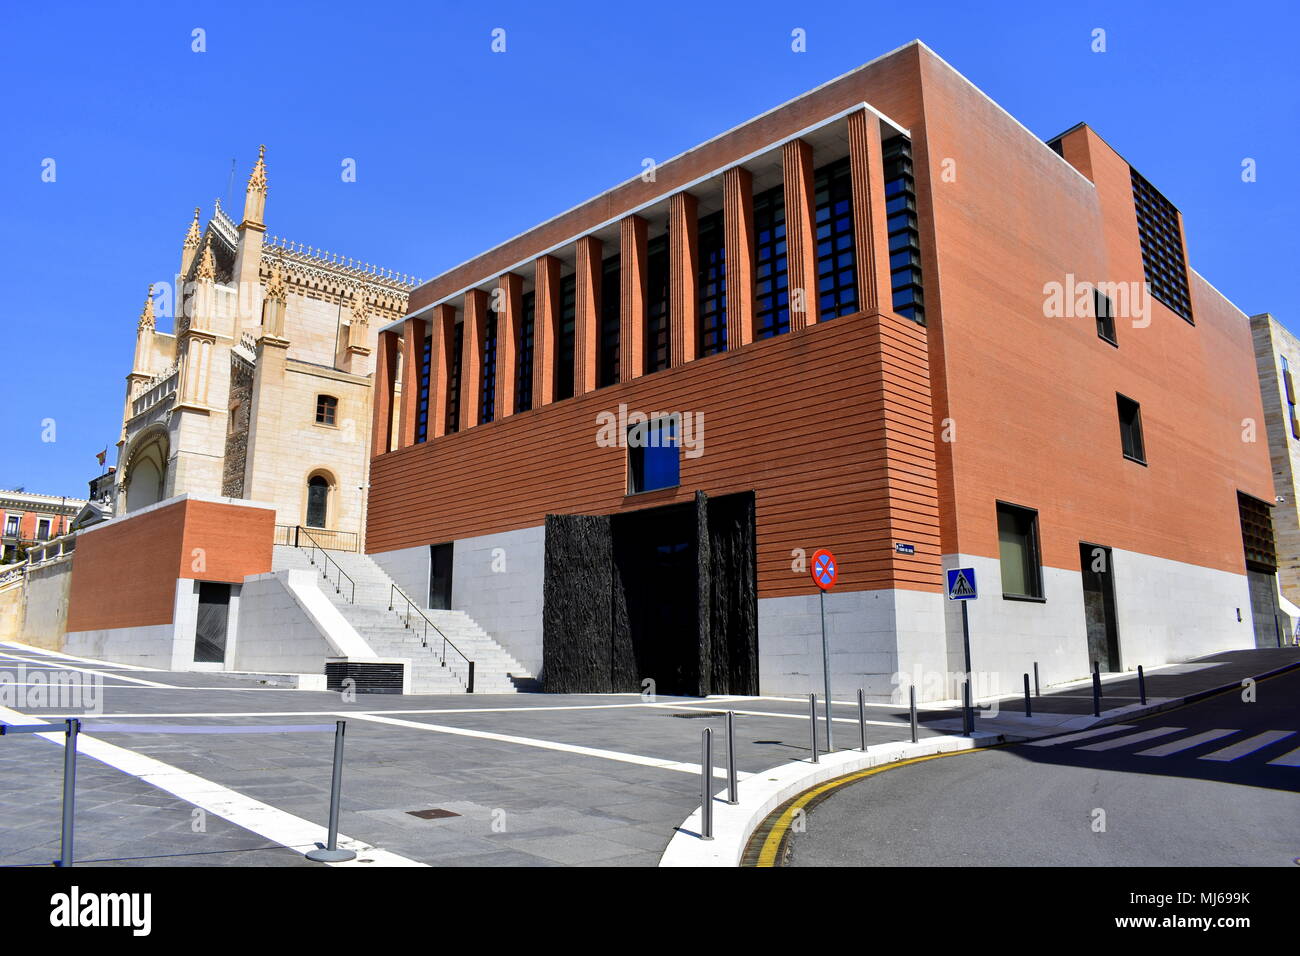 View of San Jerónimo el Real church and the Prado museum extension designed by Rafael Moneo with its monumental bronze doors, Madrid, Spain Stock Photo